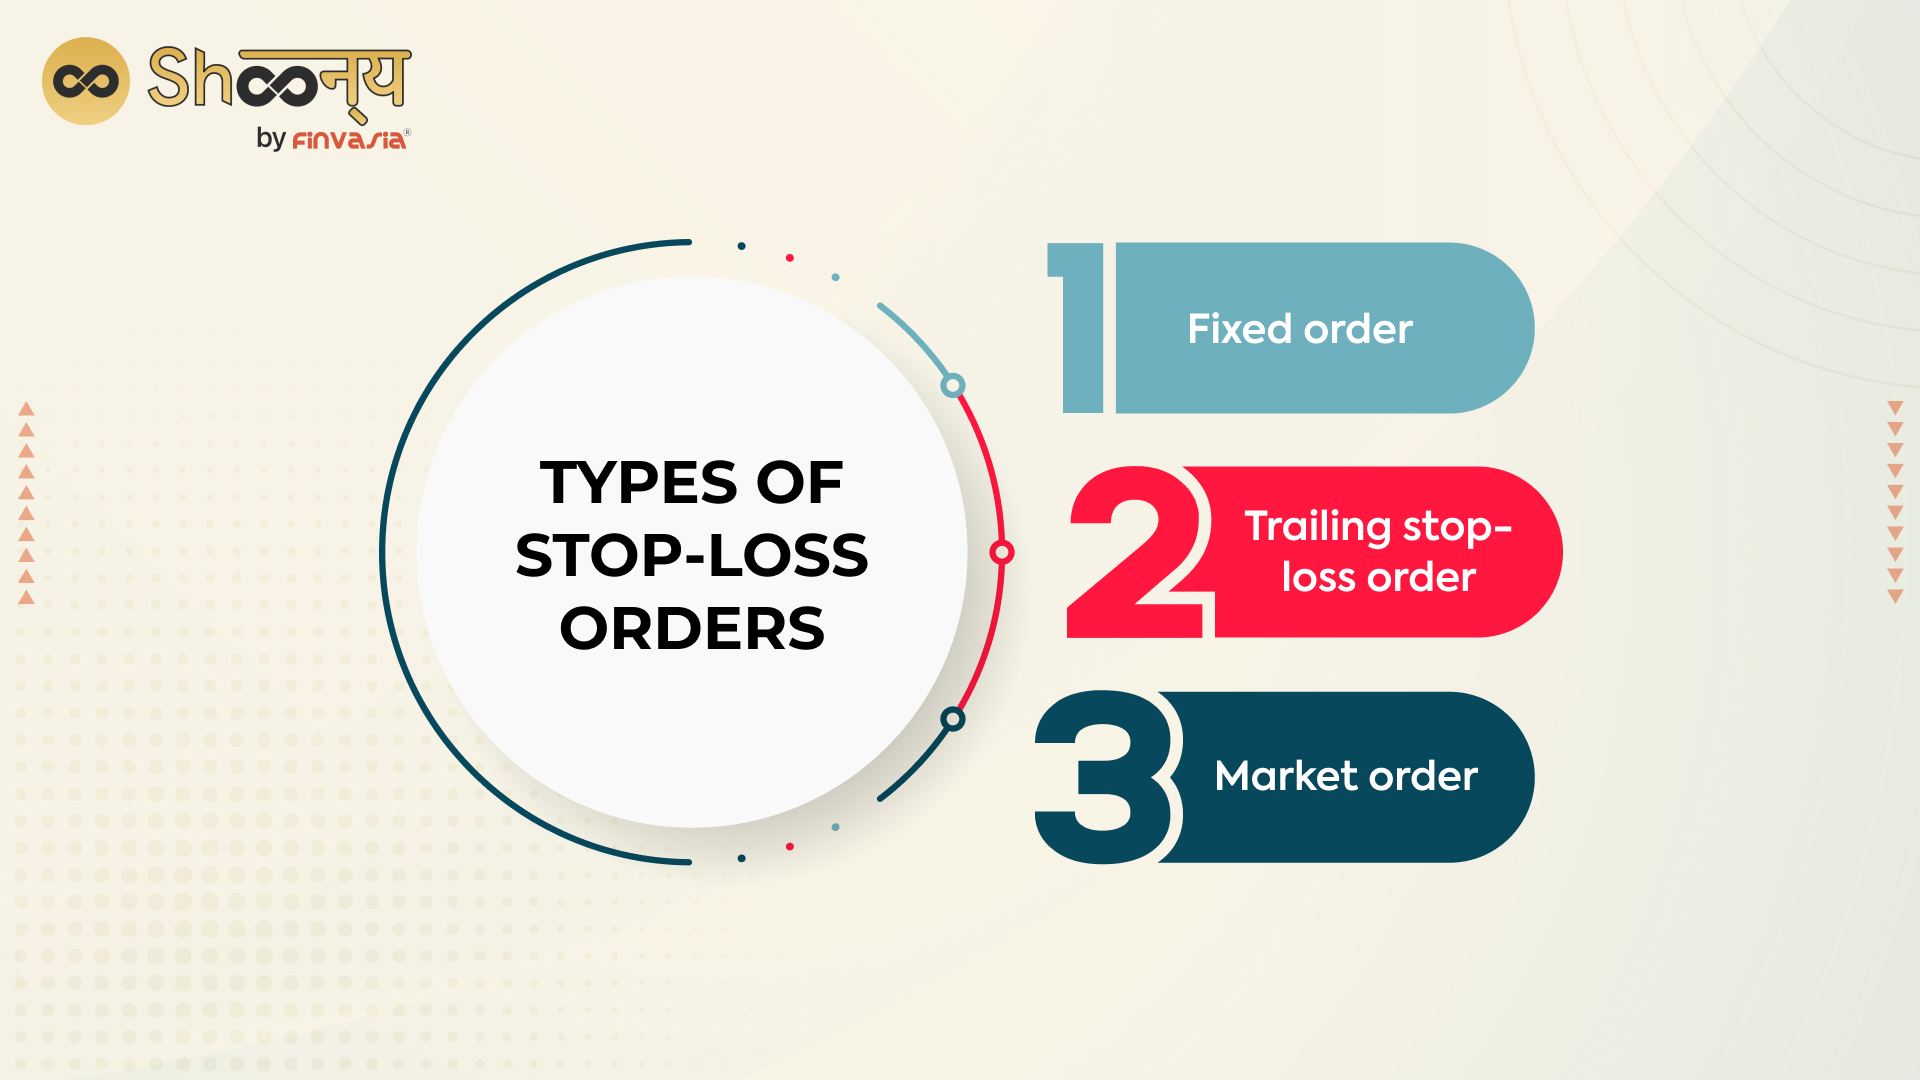 Types of stop-loss orders